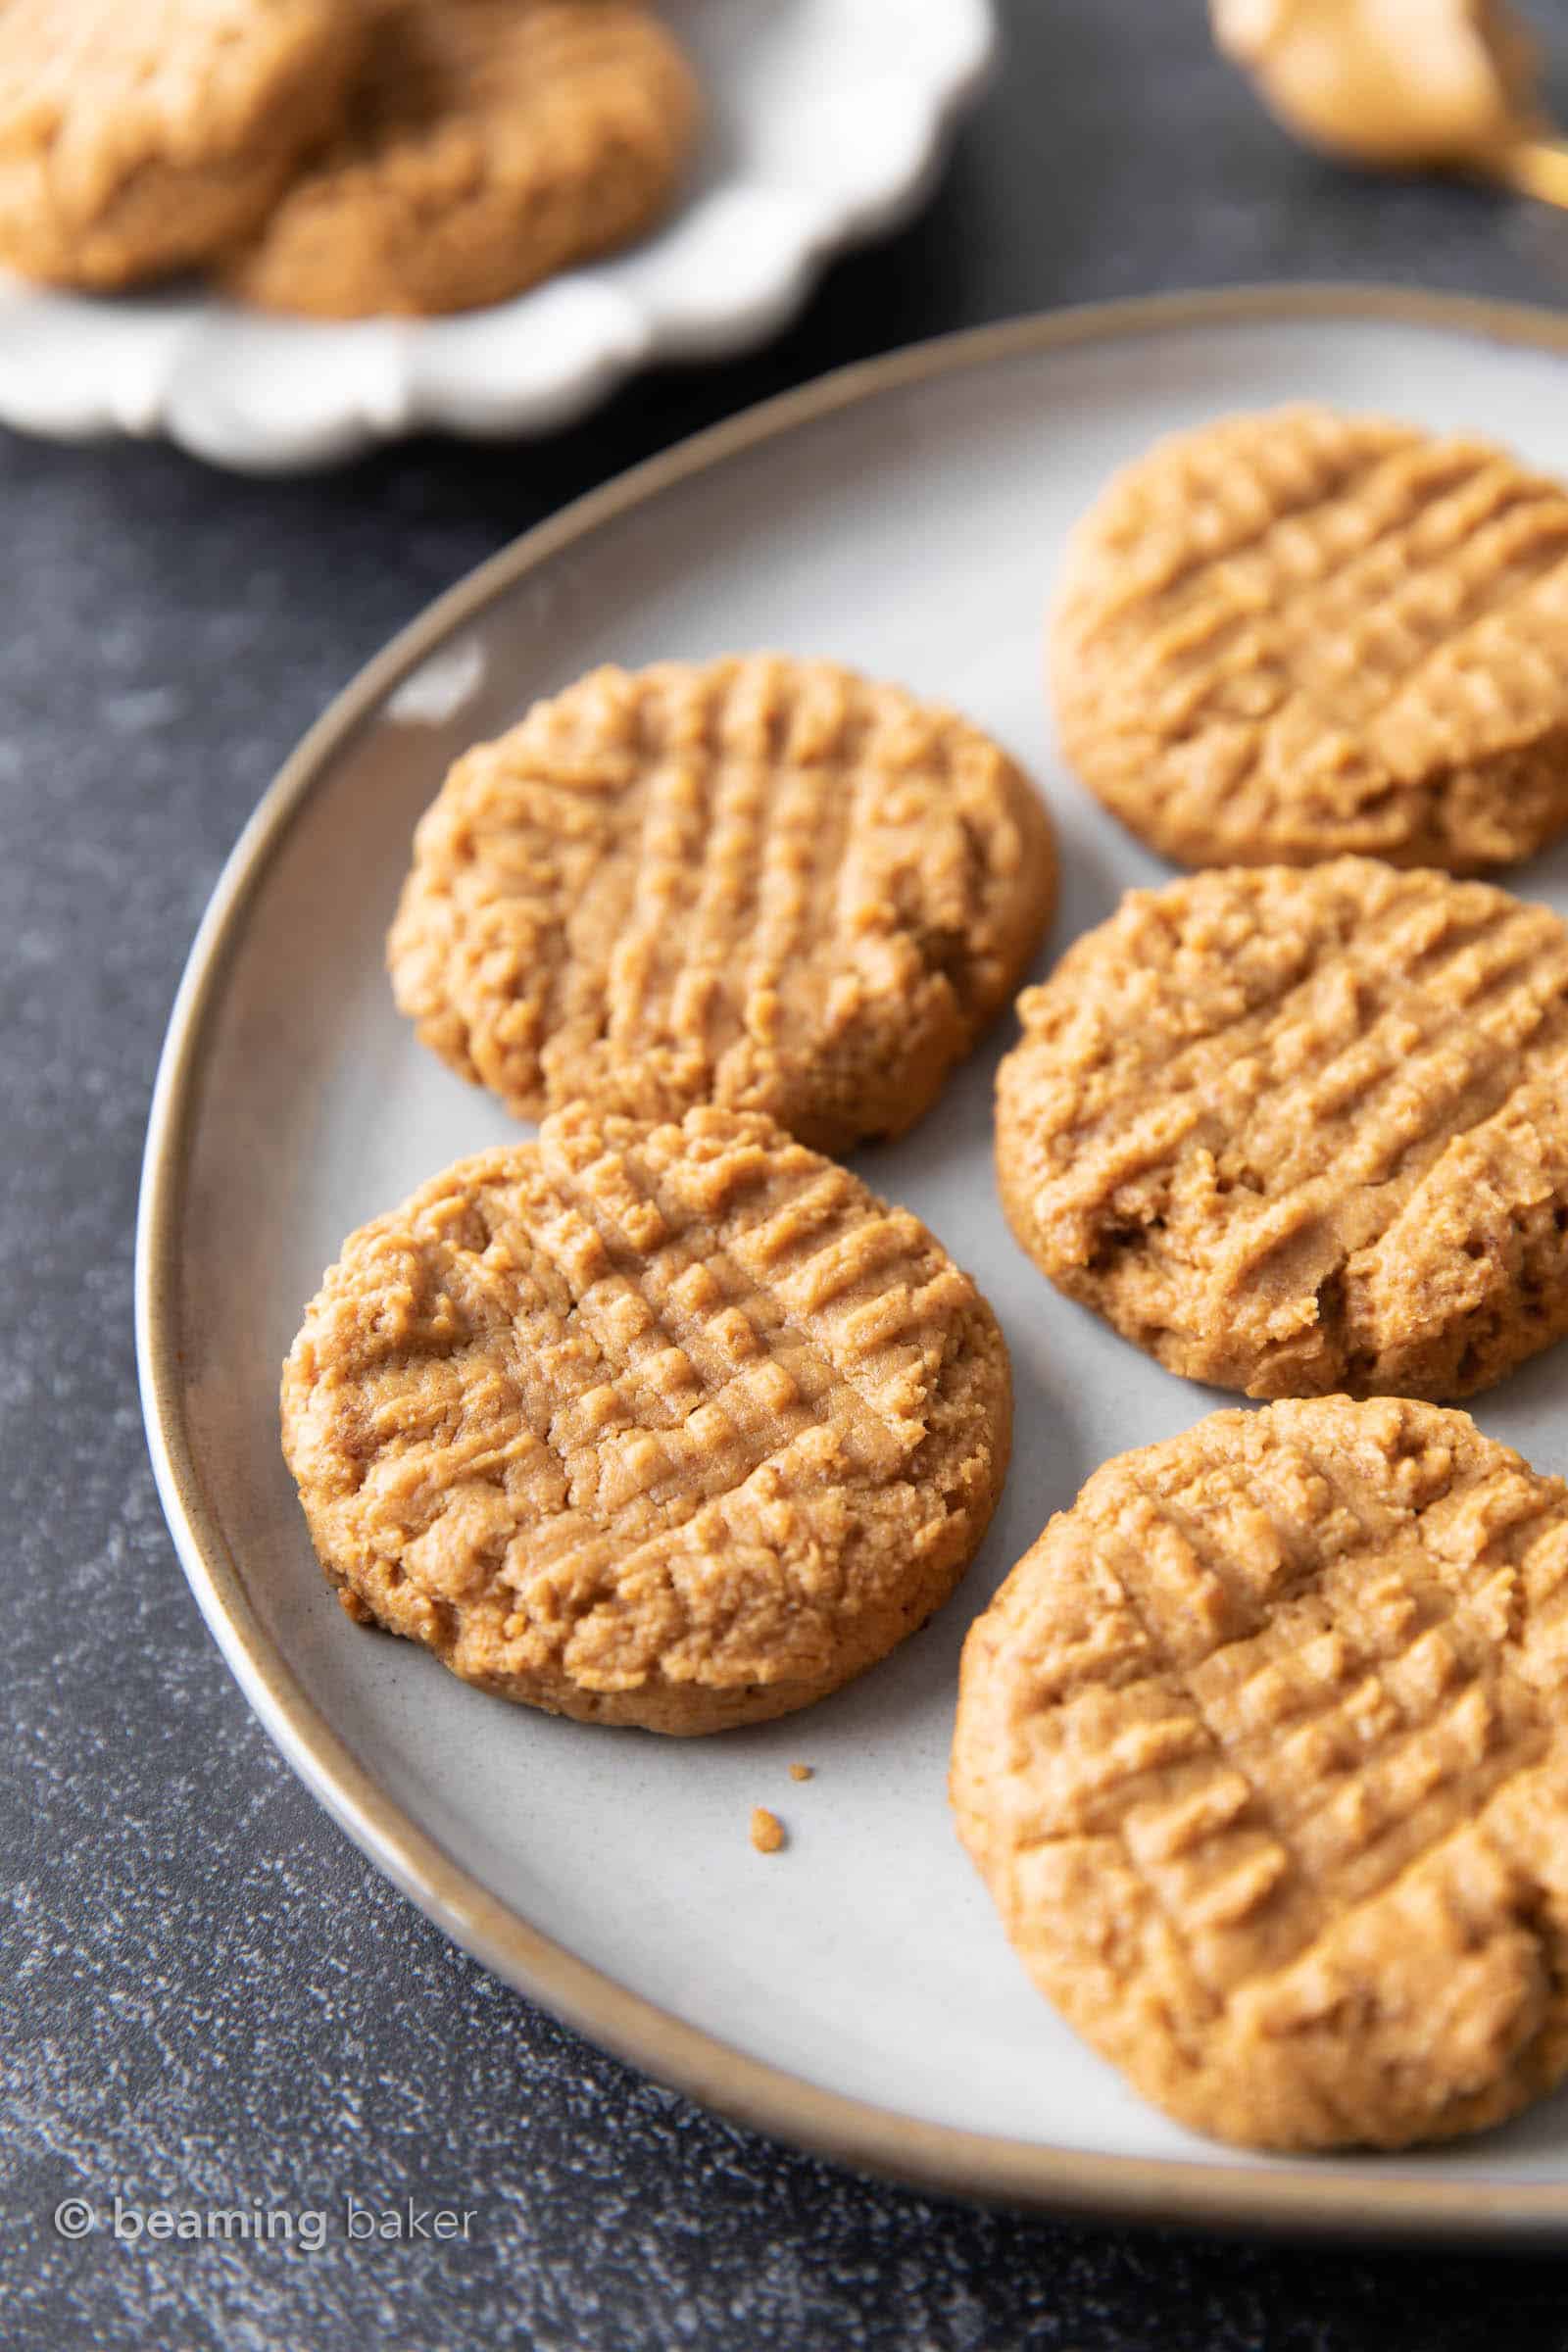 The best healthy peanut butter cookies, made with just 4 ingredients. You’ll love these refined sugar free gluten free peanut butter cookies. #healthy #glutenfree #peanutbutter #cookies | Recipe at BeamingBaker.com